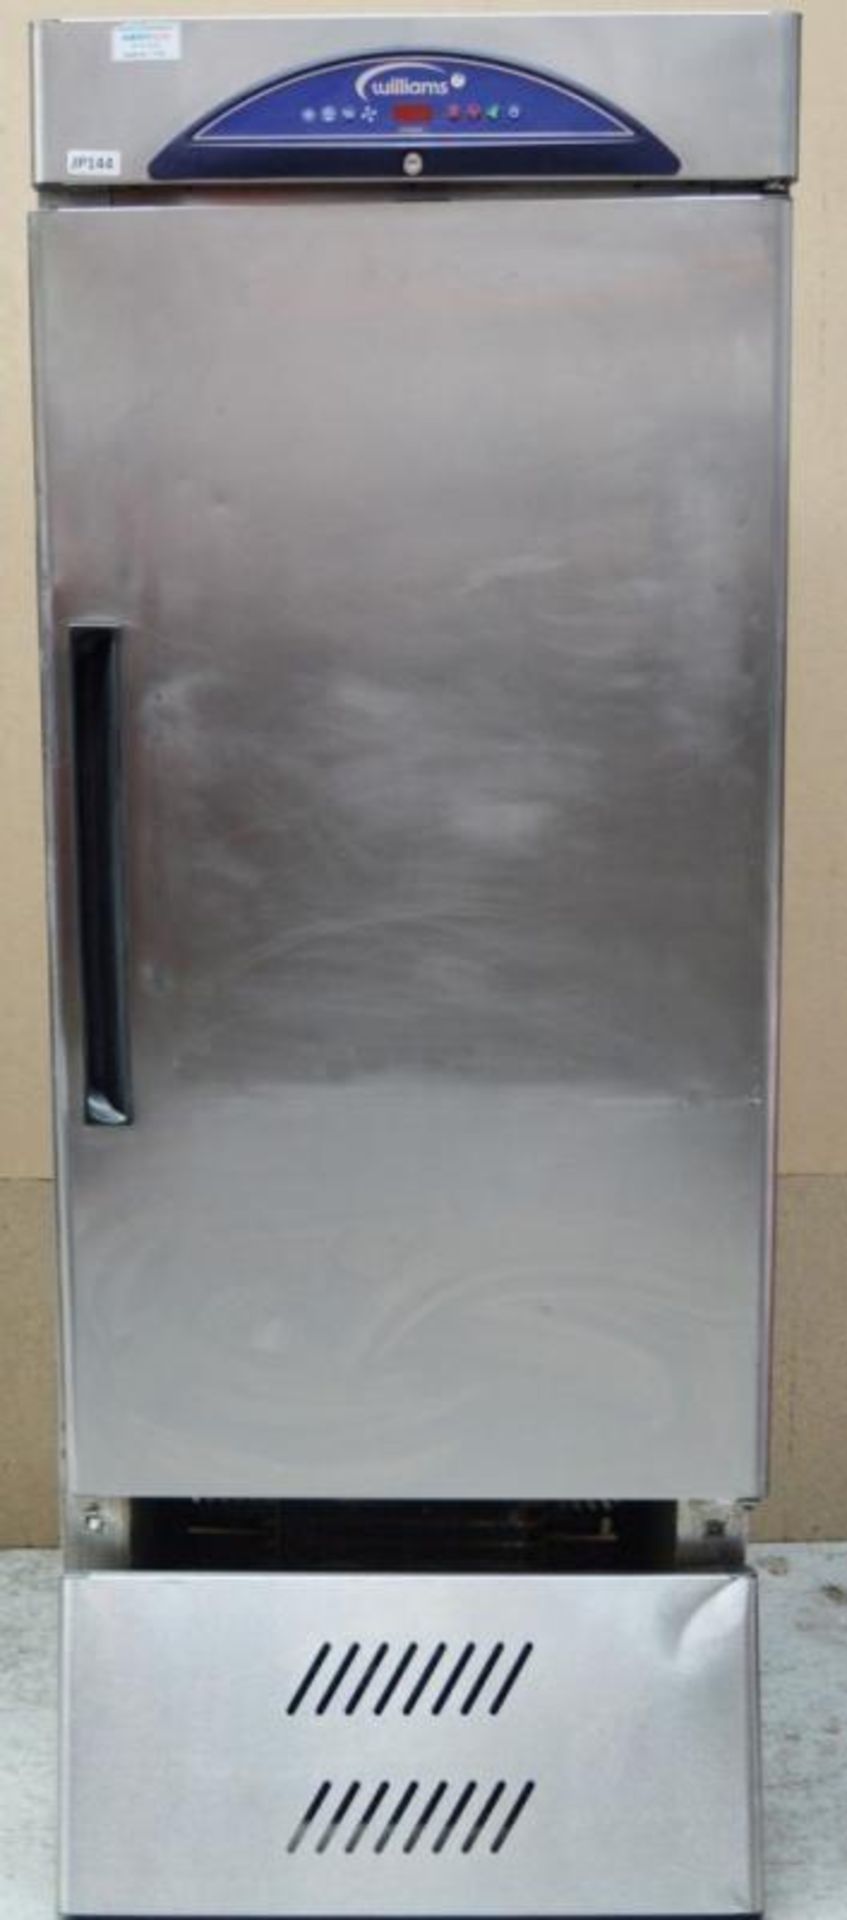 1 x Williams Single Door Upright Refrigerator - Model HZ16-WB - Stainless Steel Finish - Suitable